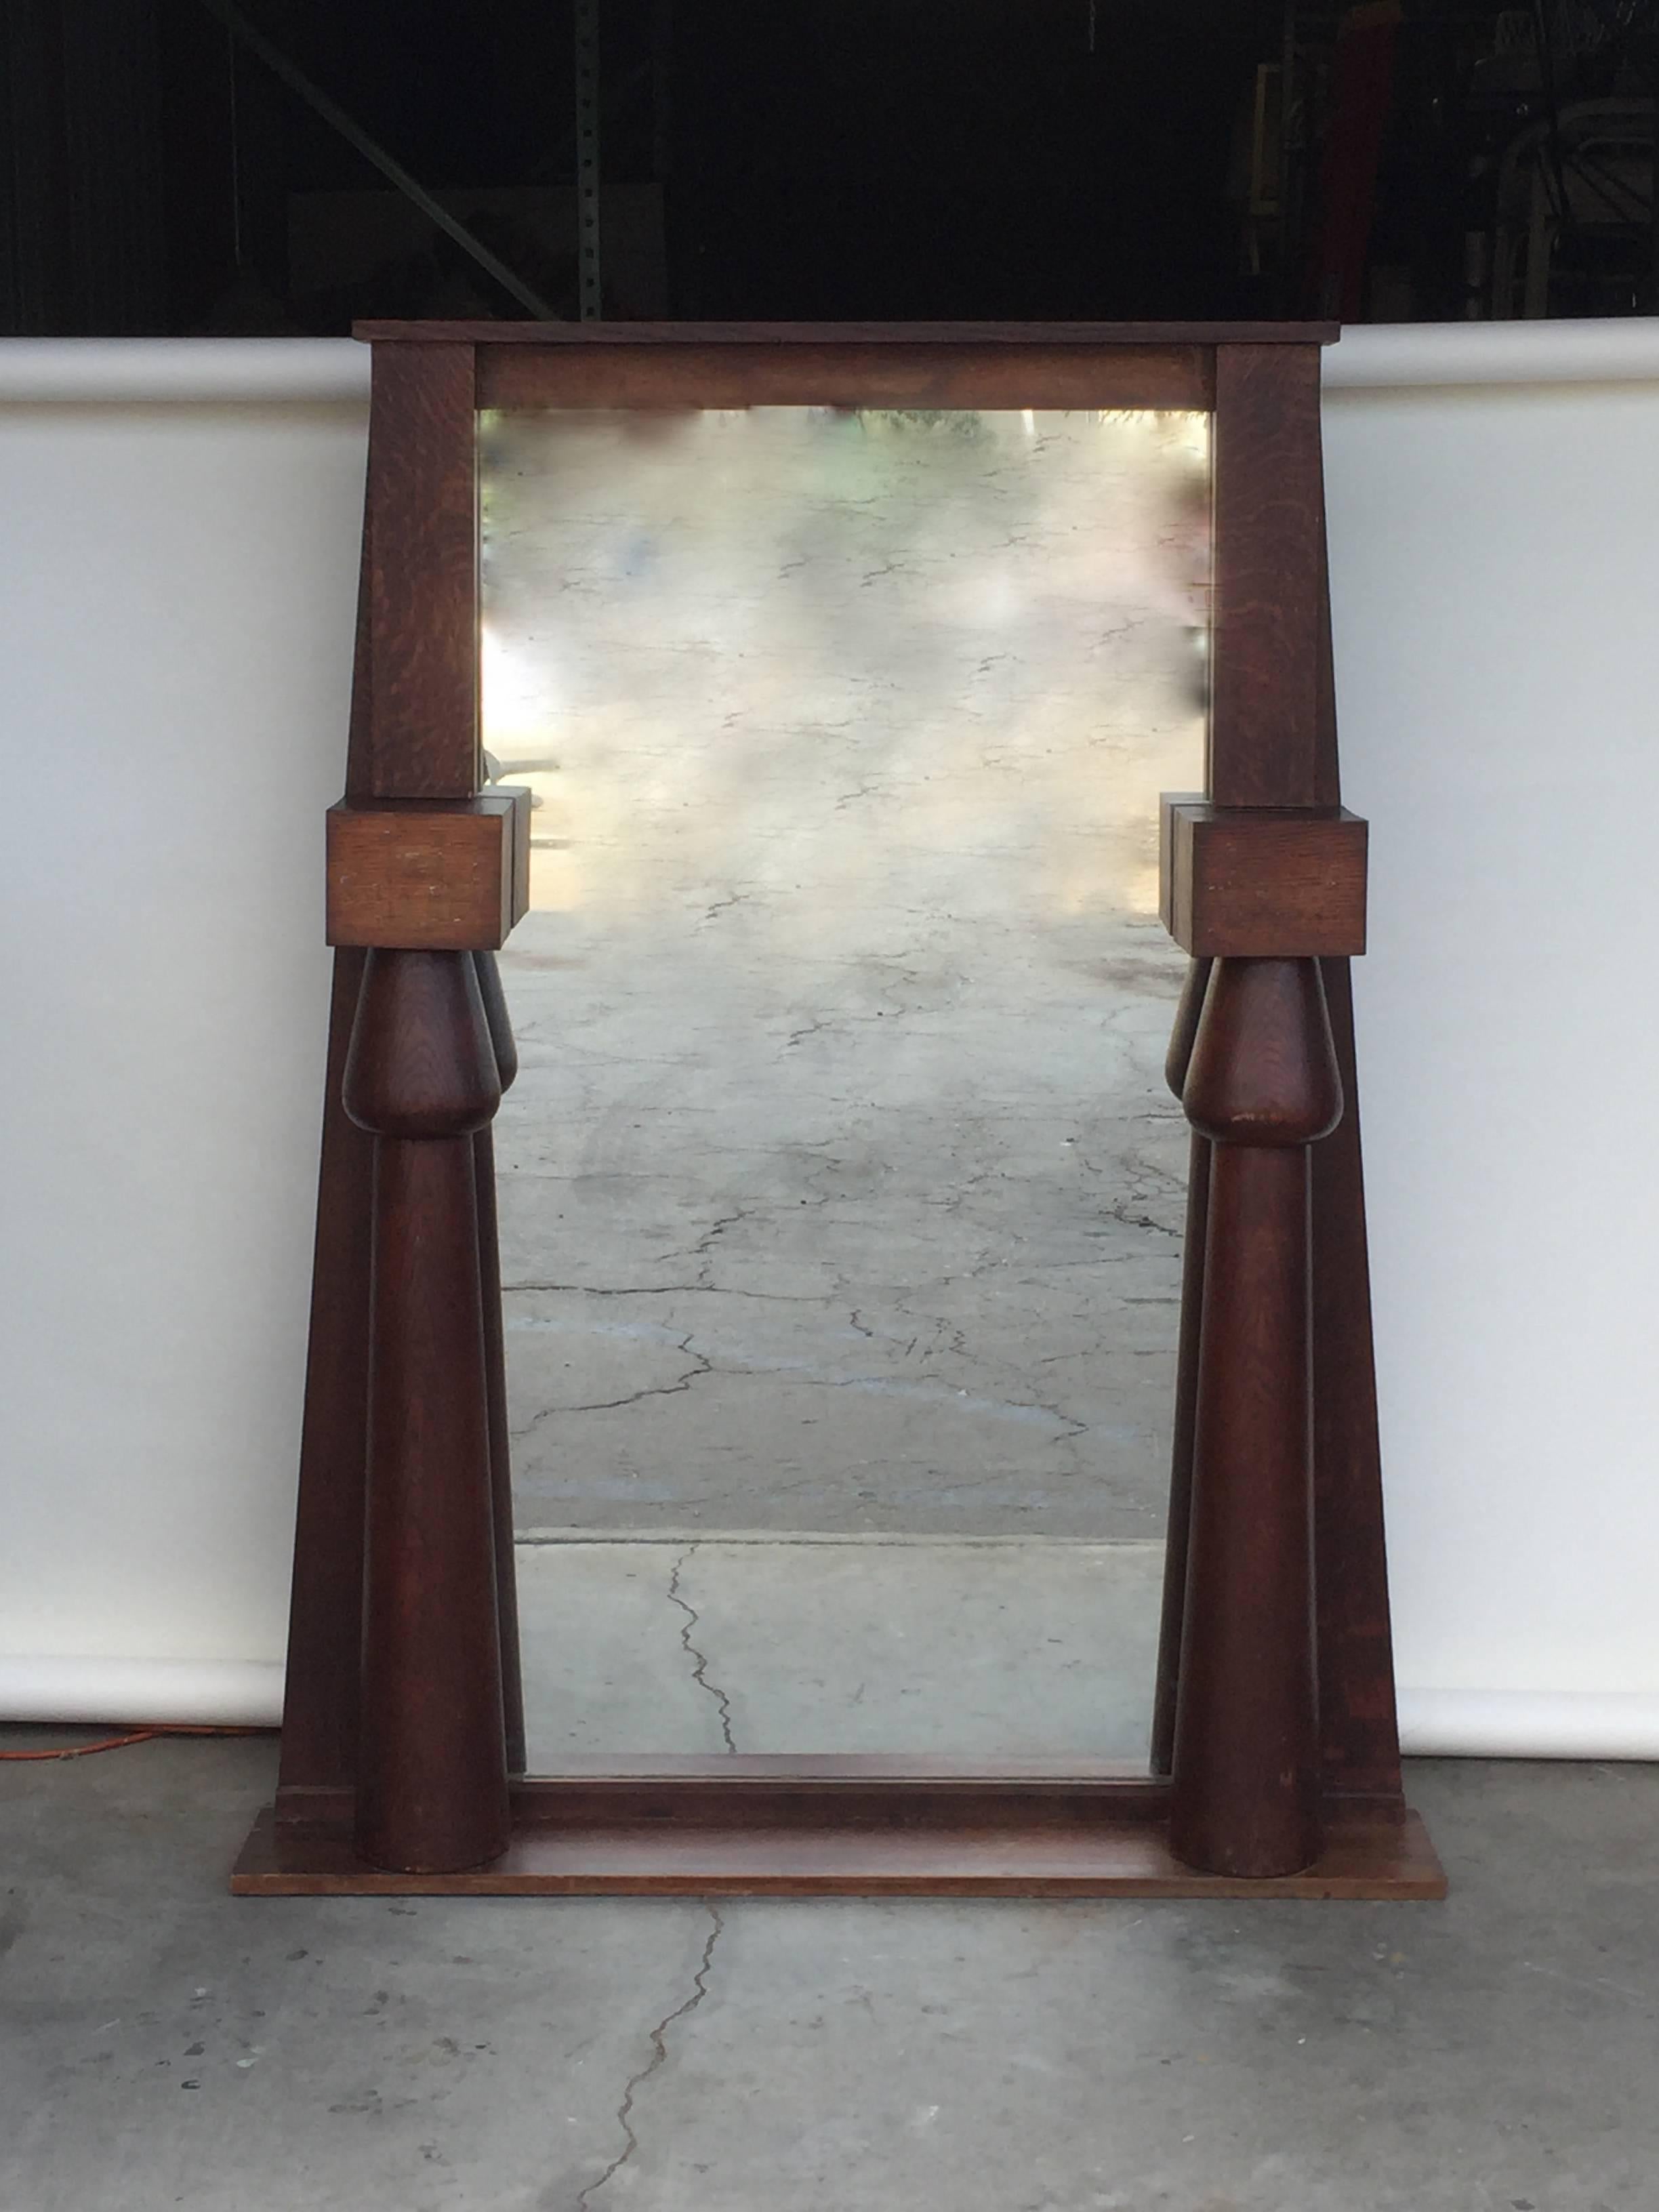 Impressive Egyptian Revival Arts & Crafts stained oak mirror. Perfect over a fireplace.

The last picture is of a similar styled room.